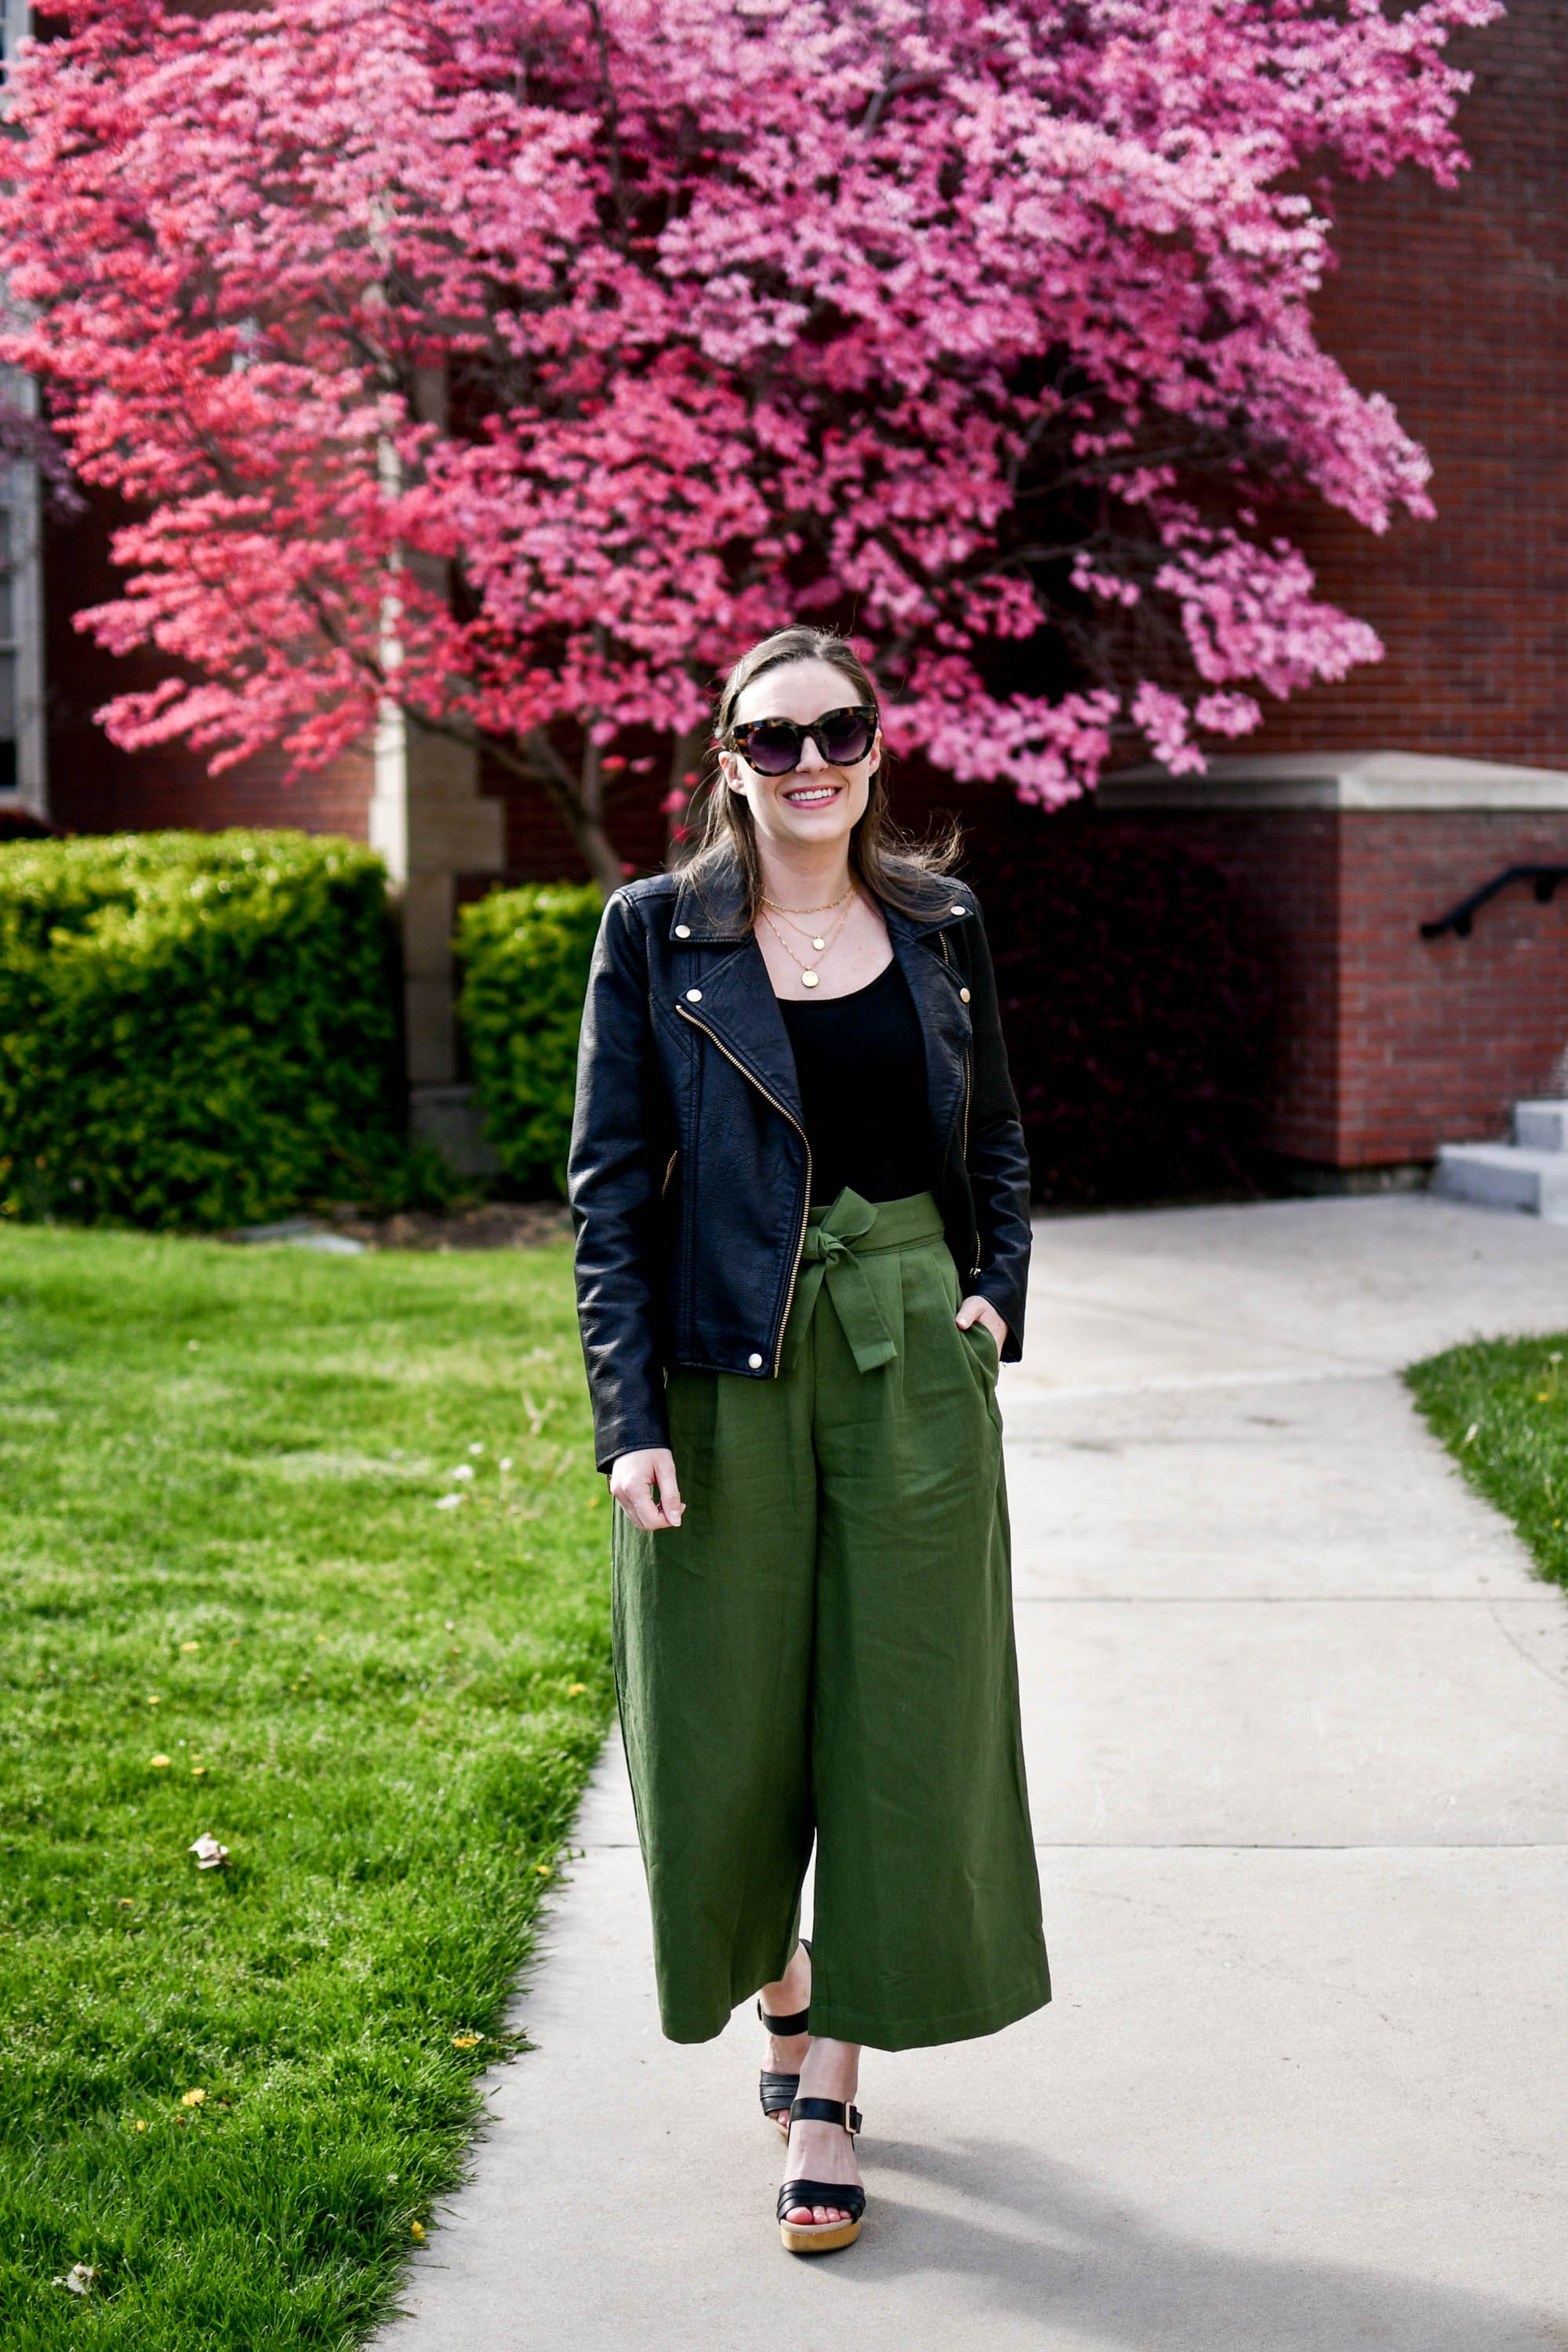 Flattering Pant Styles to Try This Spring - Extra Petite